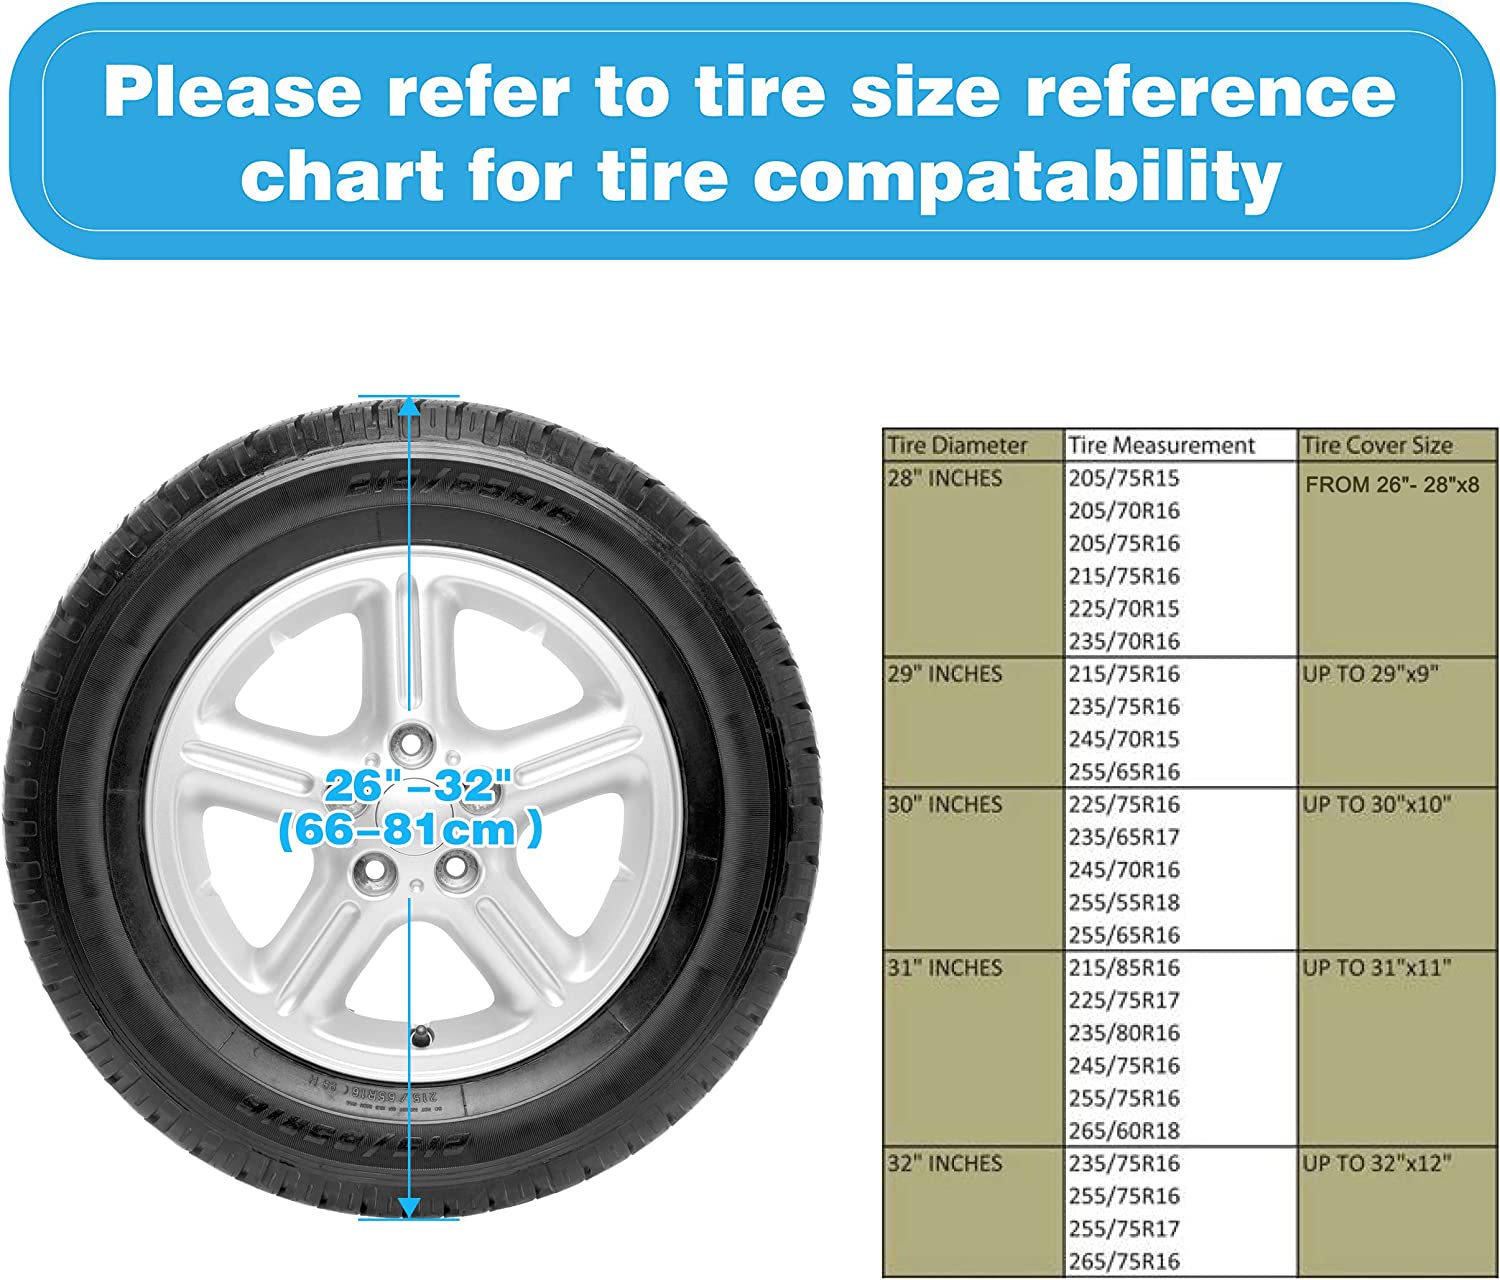 How to find the right size cover for a tire?